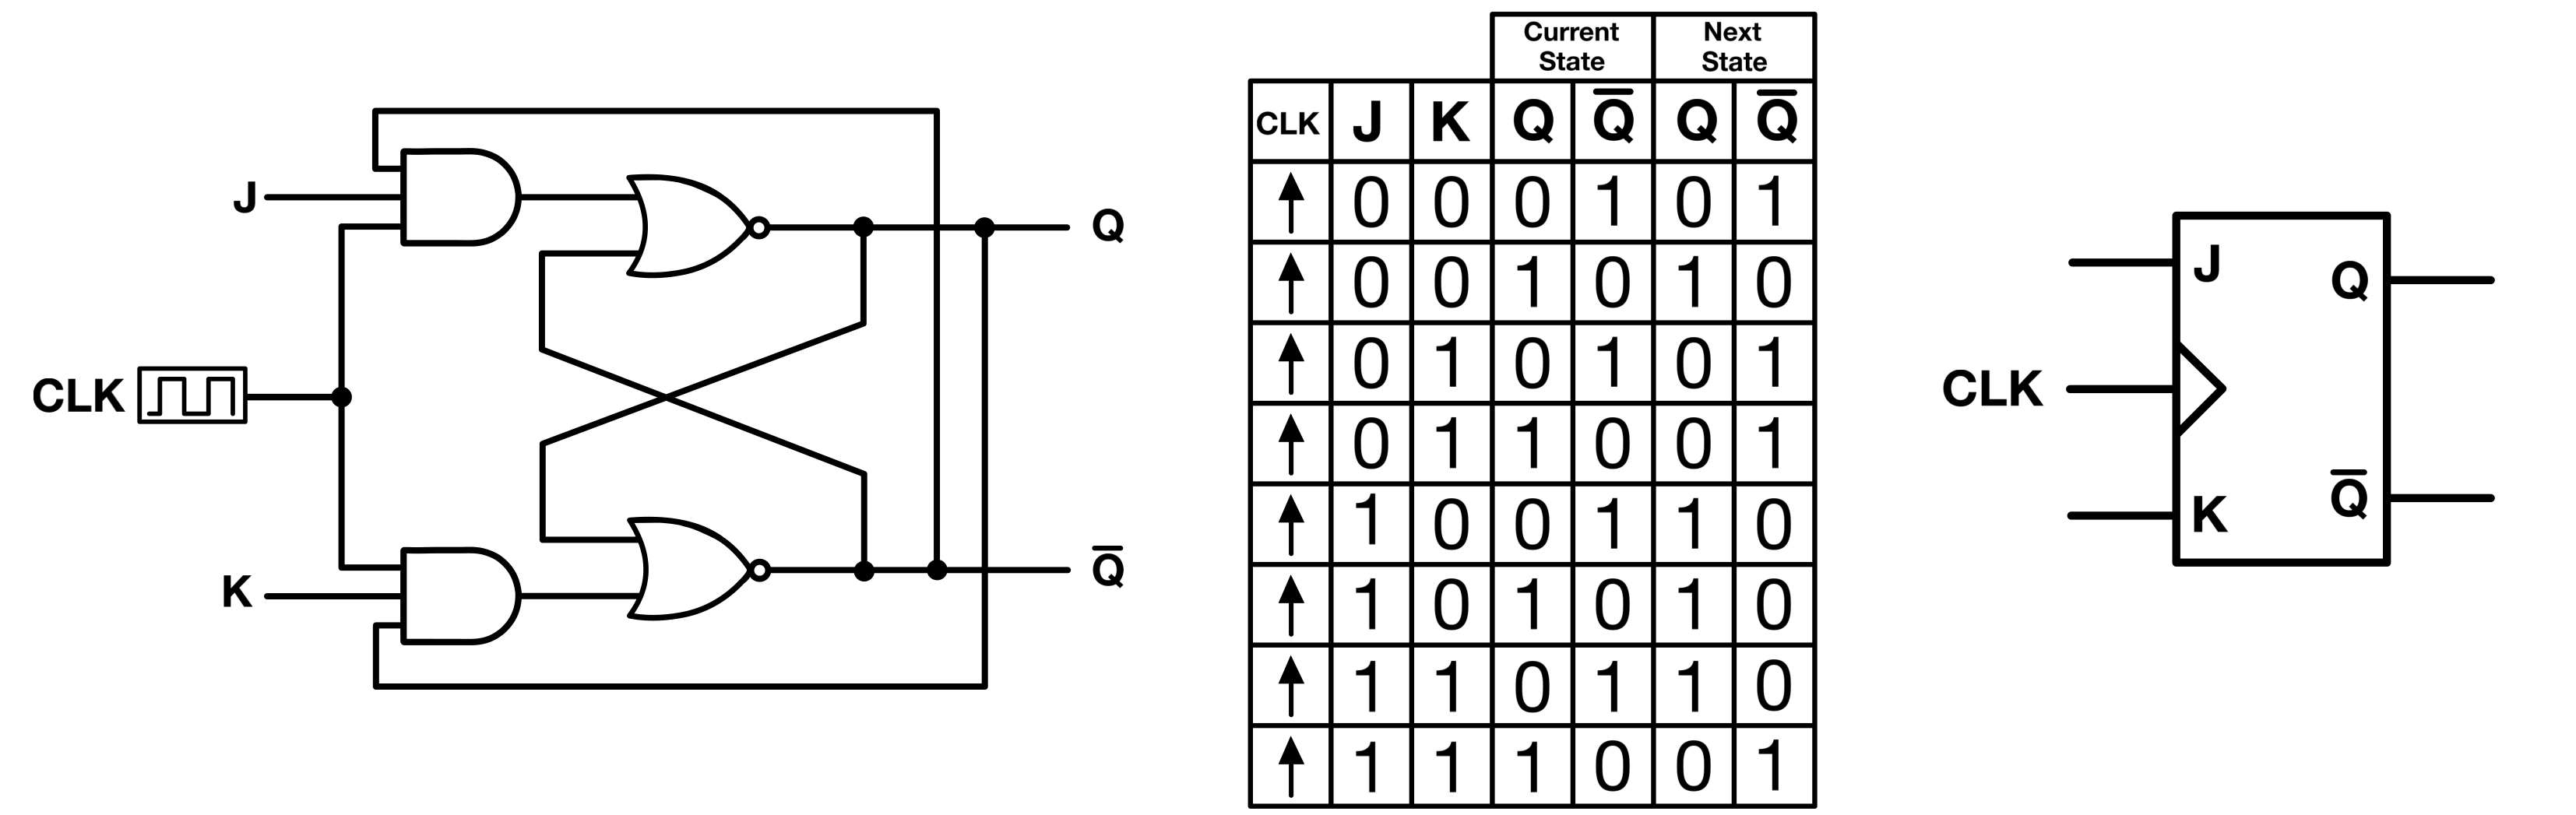 Figure 2: JK flip-flop- Schematic, Truth table, and Symbol